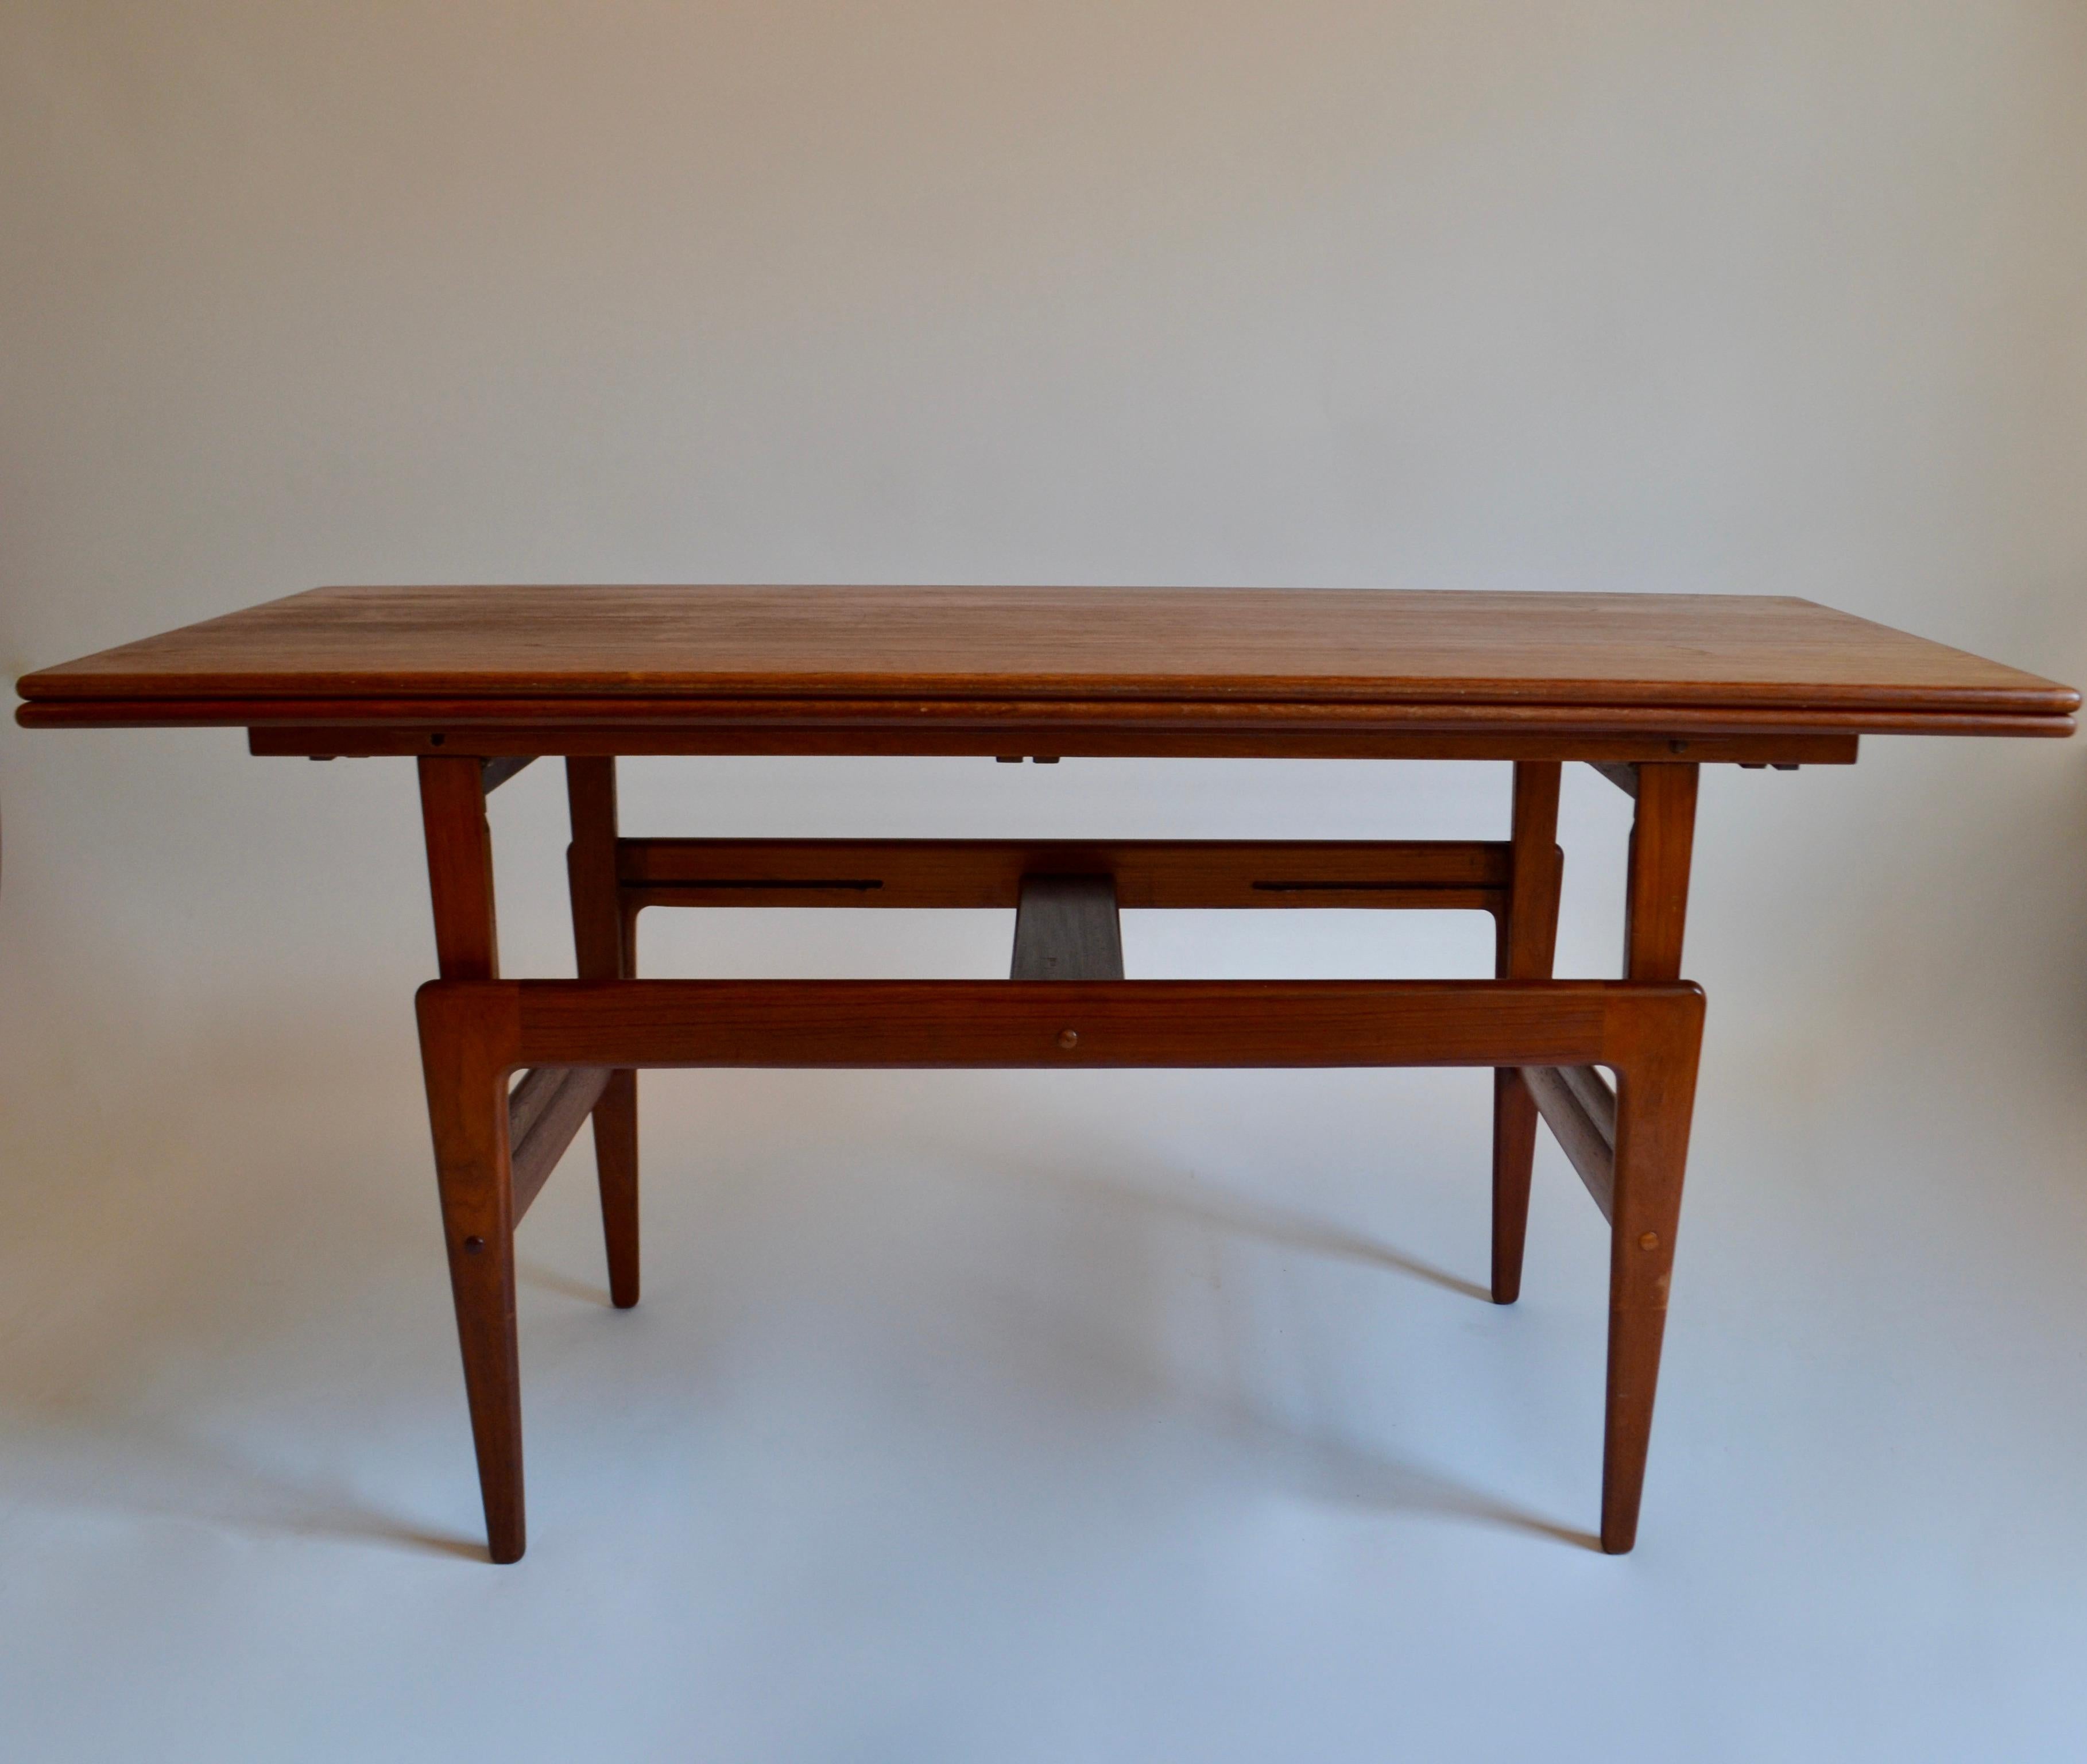 Metamorphic teak table designed by Kai Kristiansen during his time at Vildbjerg Møbelfabrik in Denmark, in the 1960s. With multiple functions, this table can serve as a coffee table in the day and be elevated to serve as a dining table in the